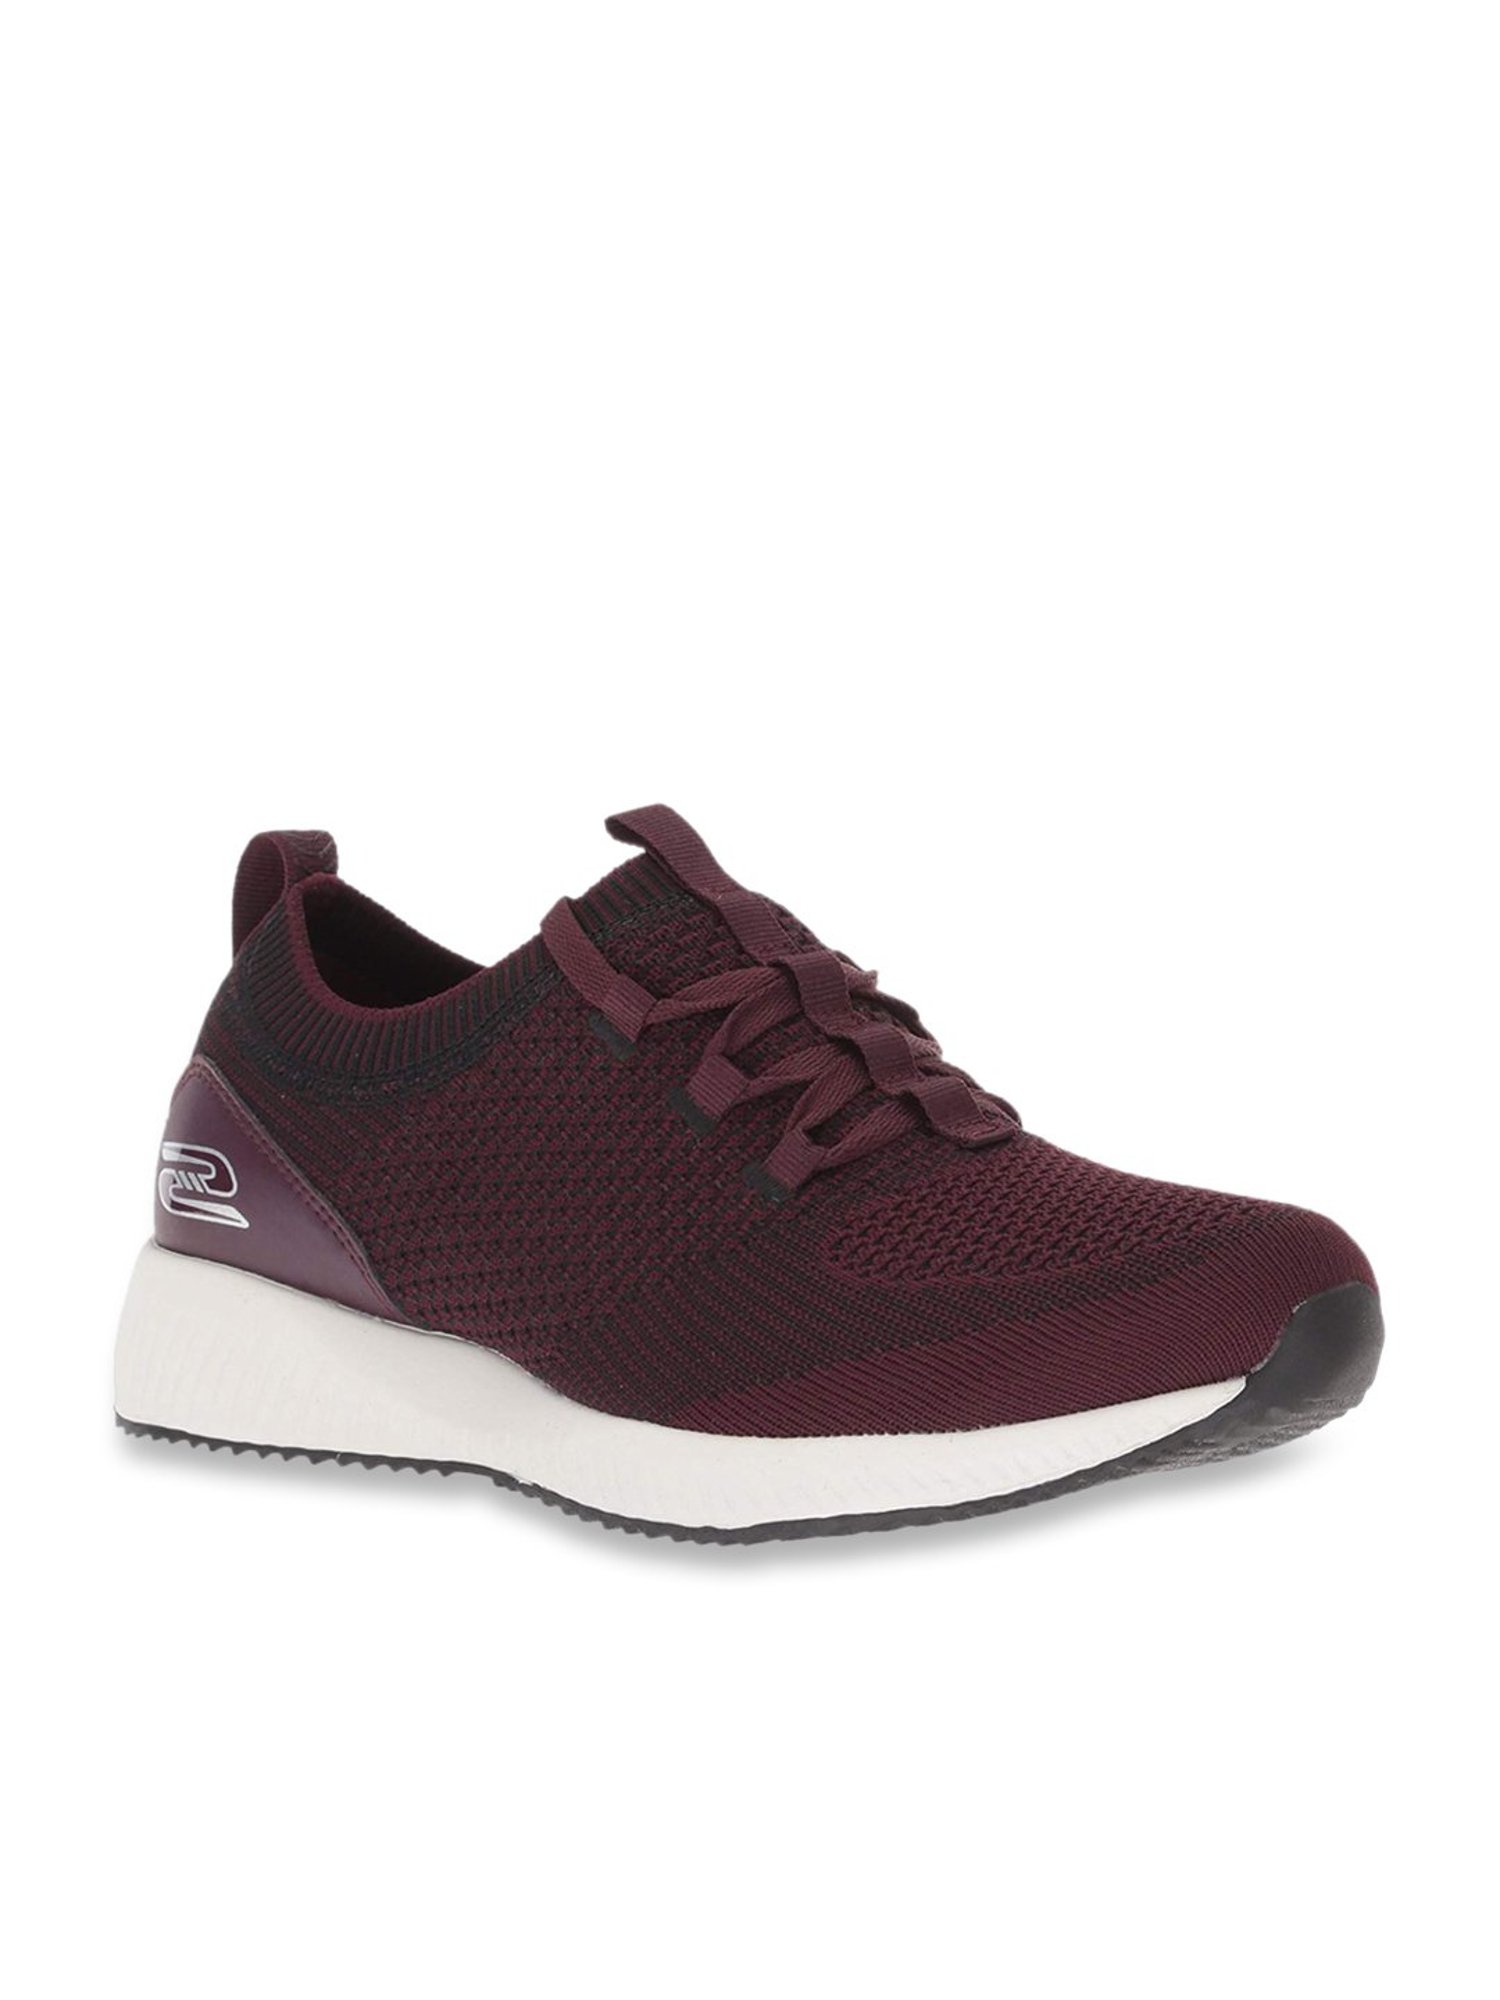 Buy Skechers Bobs Squad Alpha Gal Burgundy Sneakers for Women at @ CLiQ